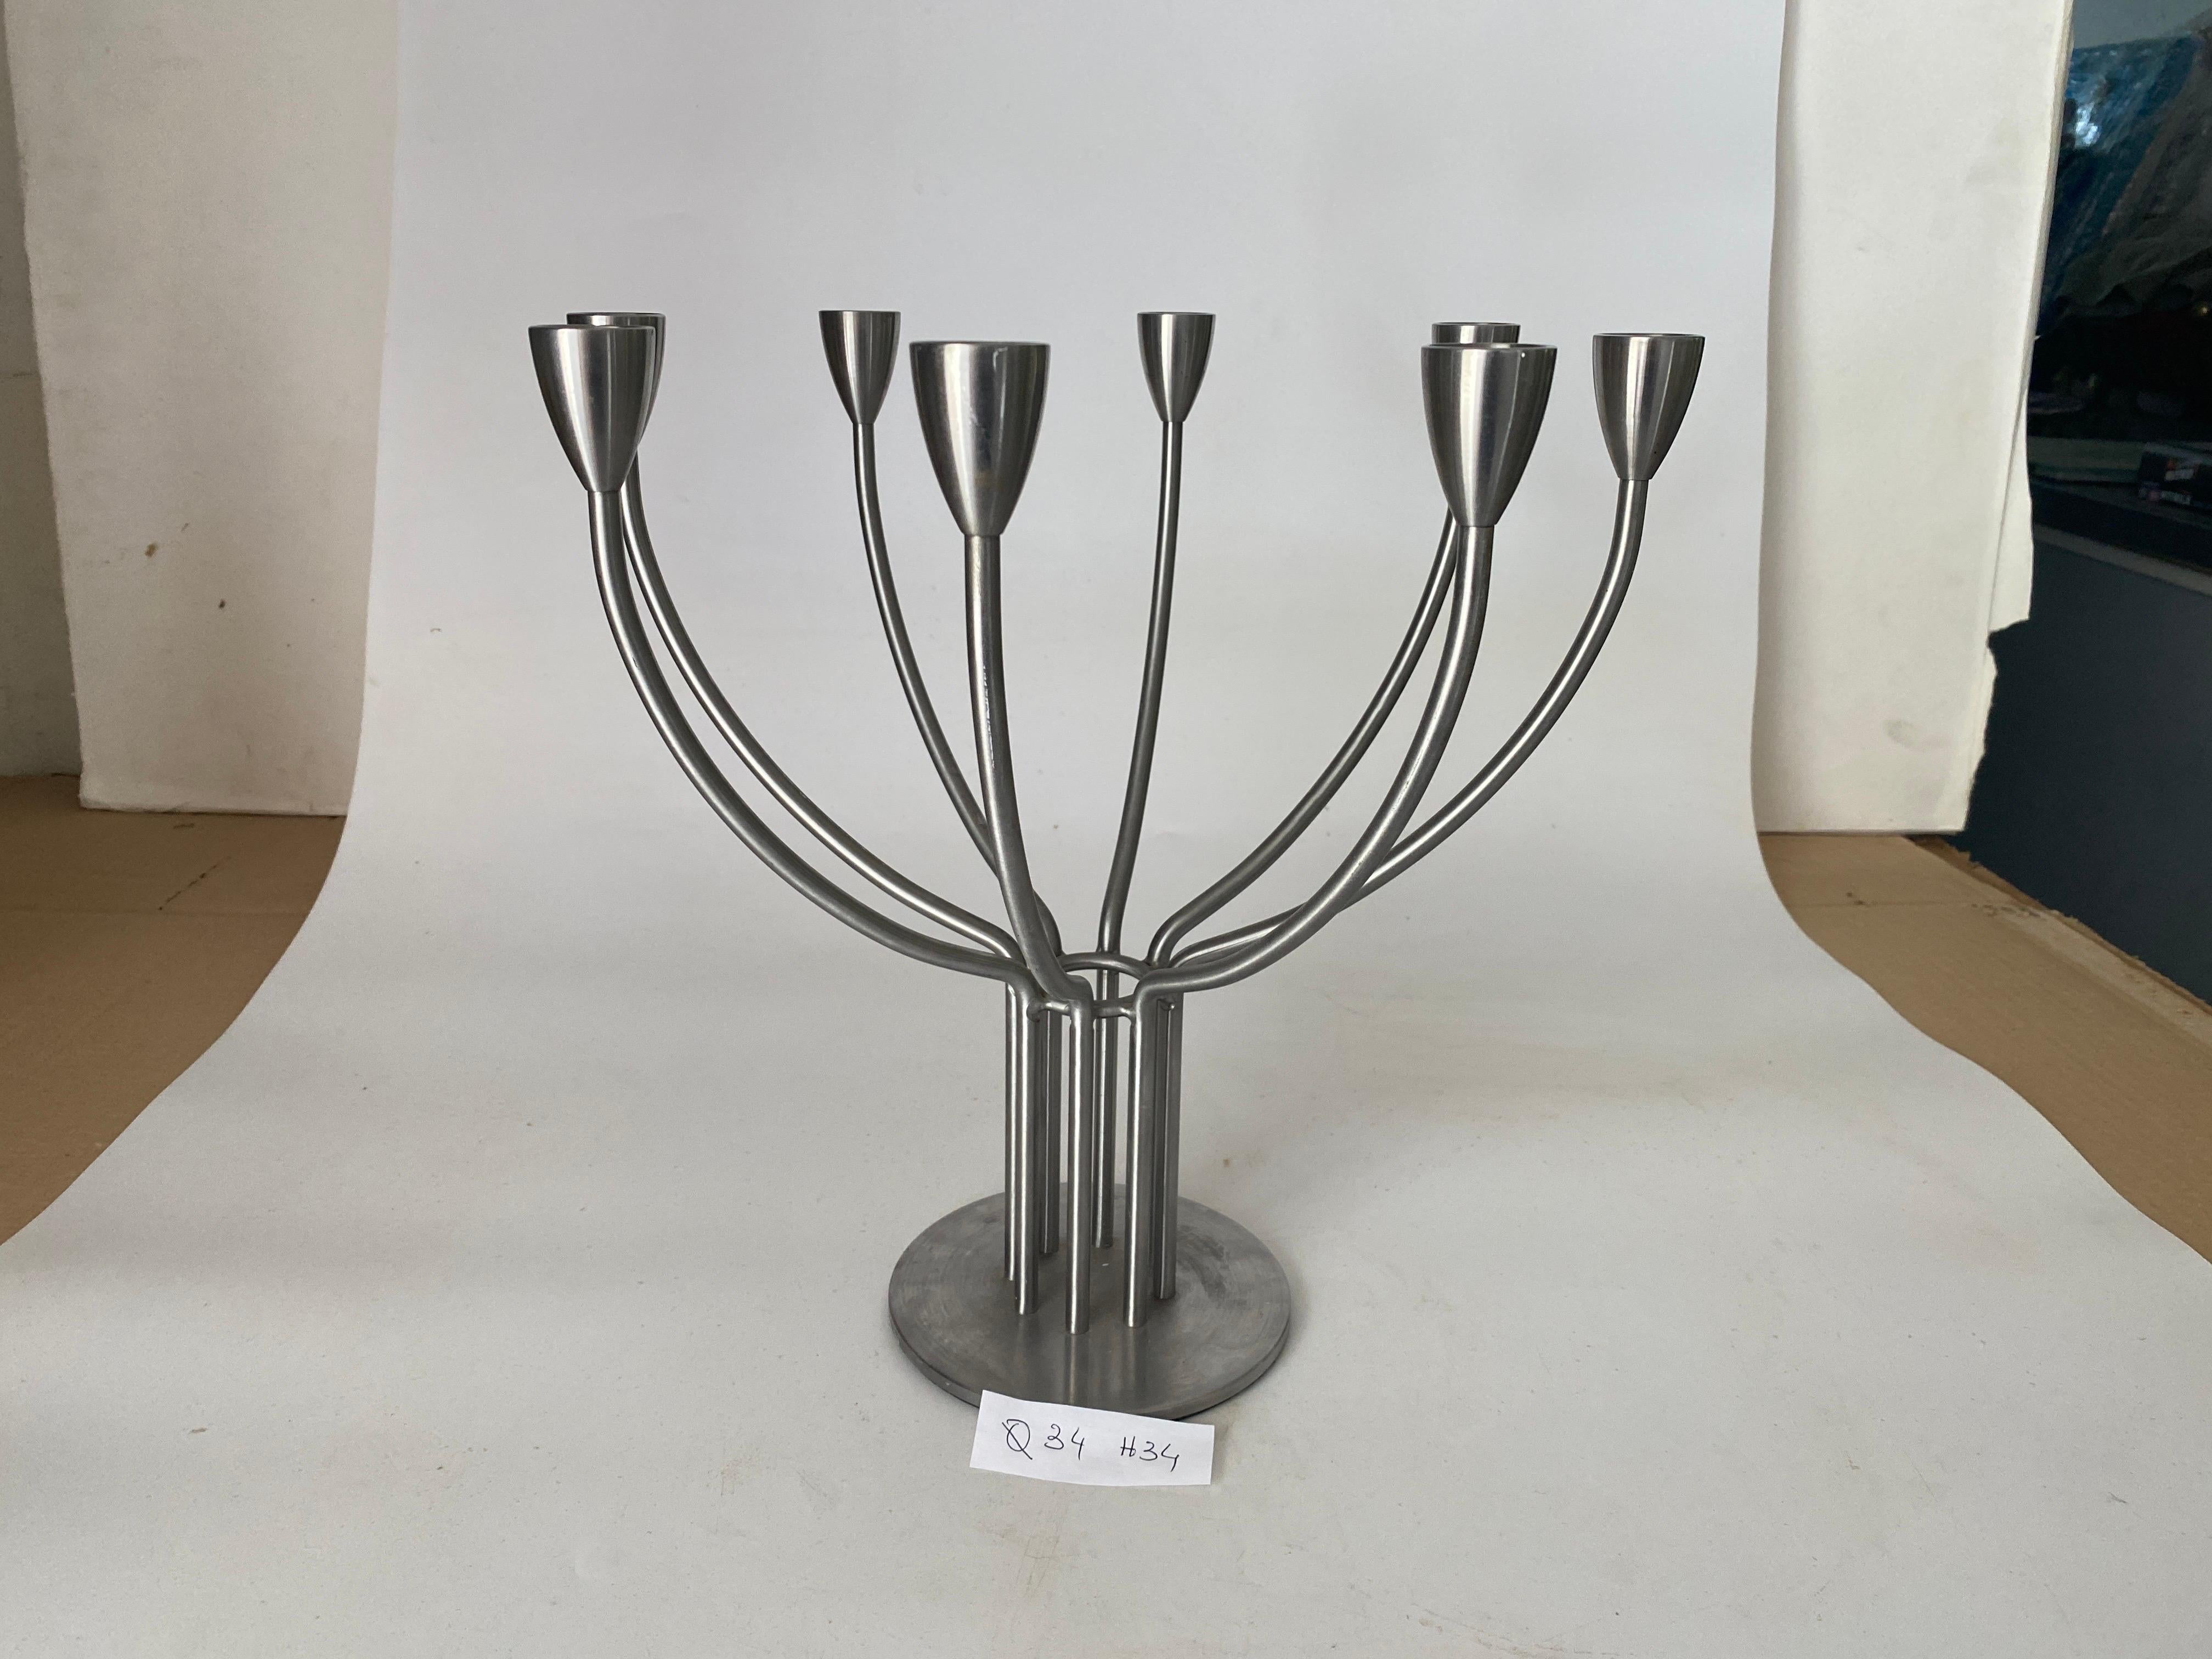 Polychromed Metal Candleholder by Hagberg Swenden 20th Century Siver color 8 Arms For Sale